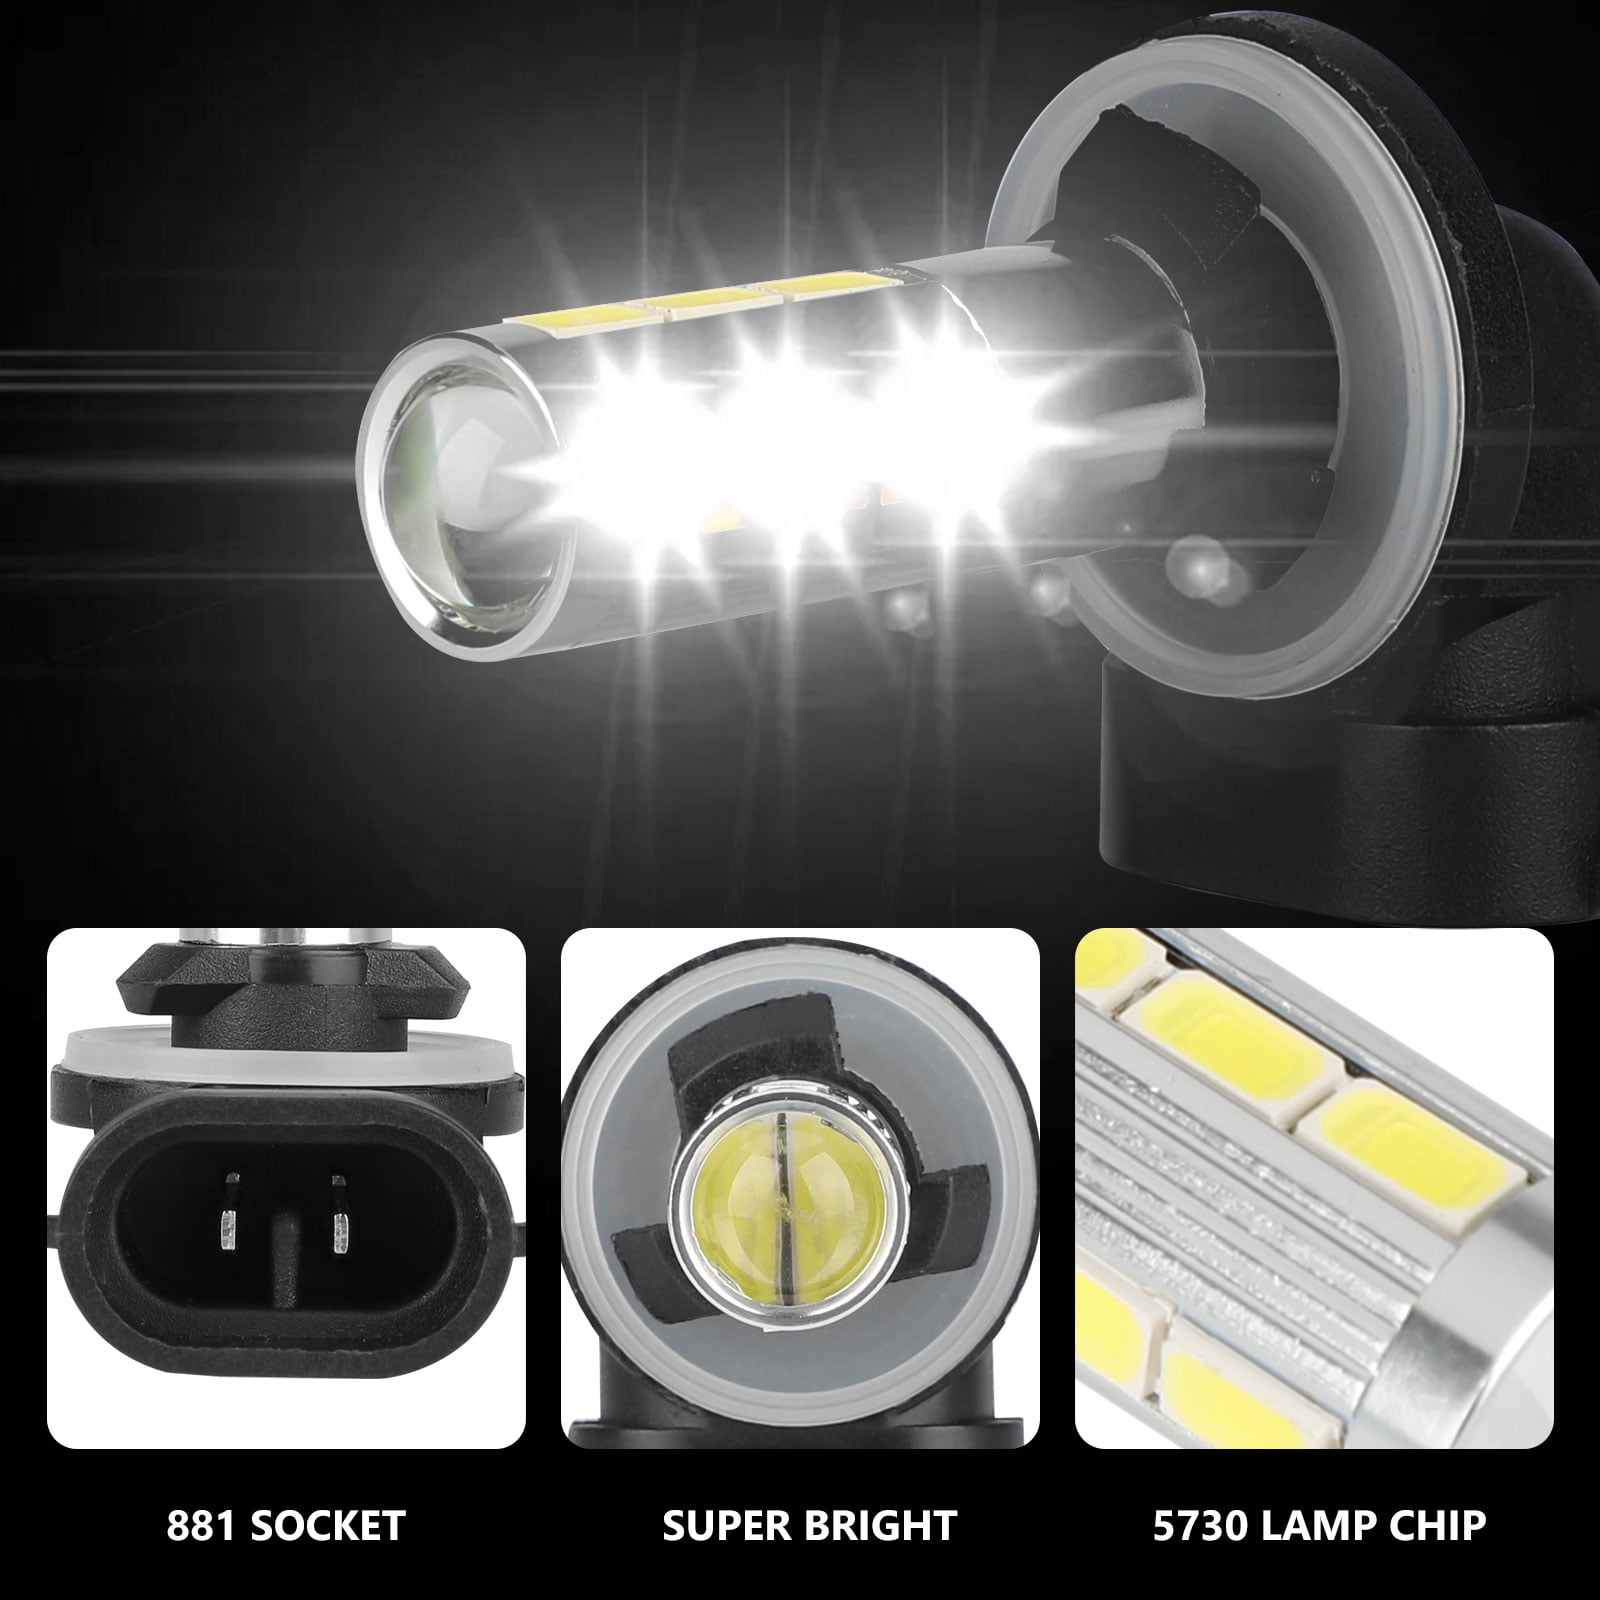 Calais Extremely Bright 881 LED Fog lights 2000 lumens High Power COB Chips LED 881 886 889 894 3000K Yellow LED Fog Lights Lamp Bulbs Replacement Set of 2 